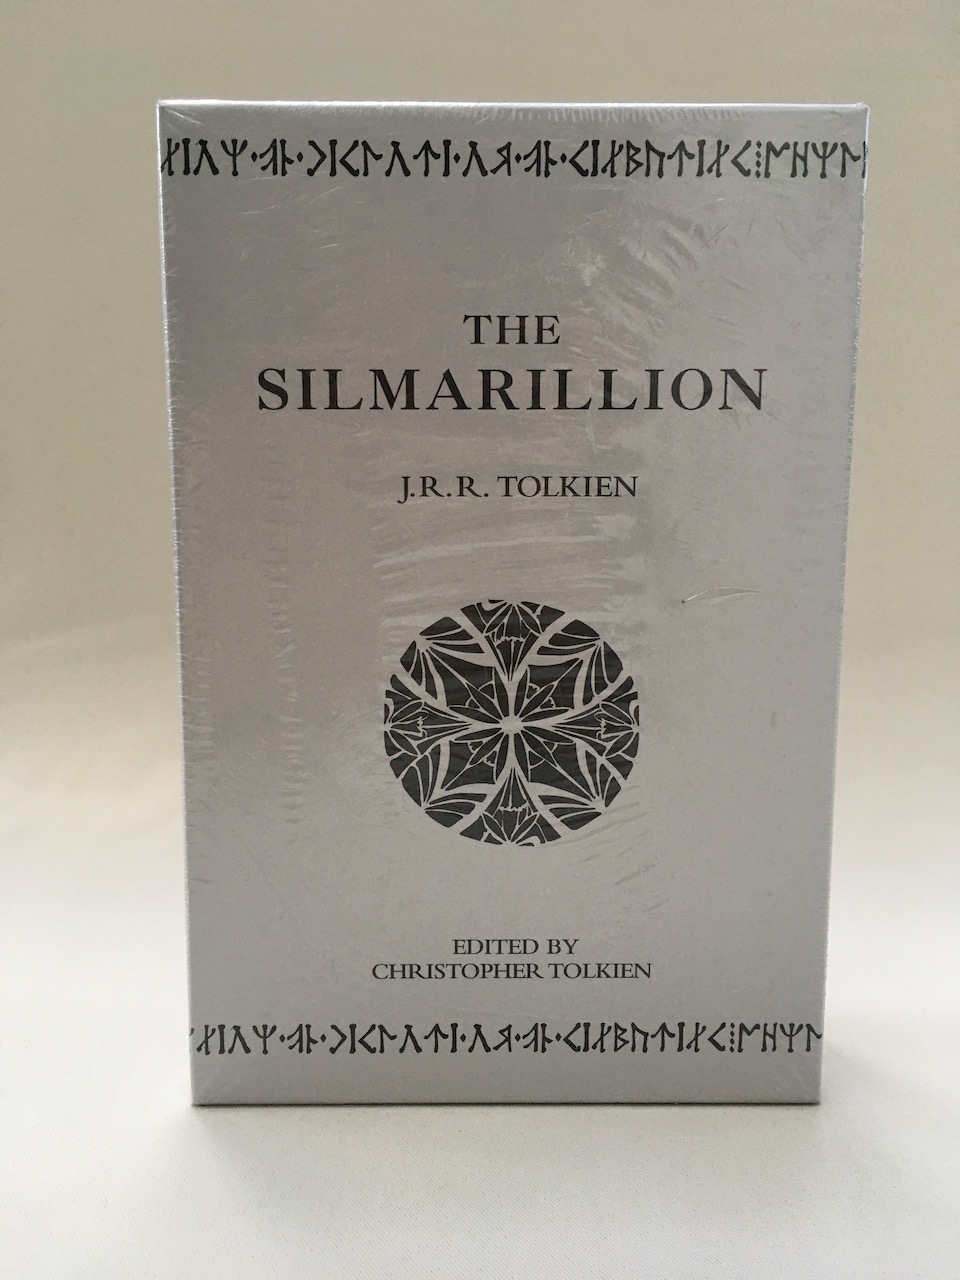 
The Silmarillion Limited Collector's Box 2